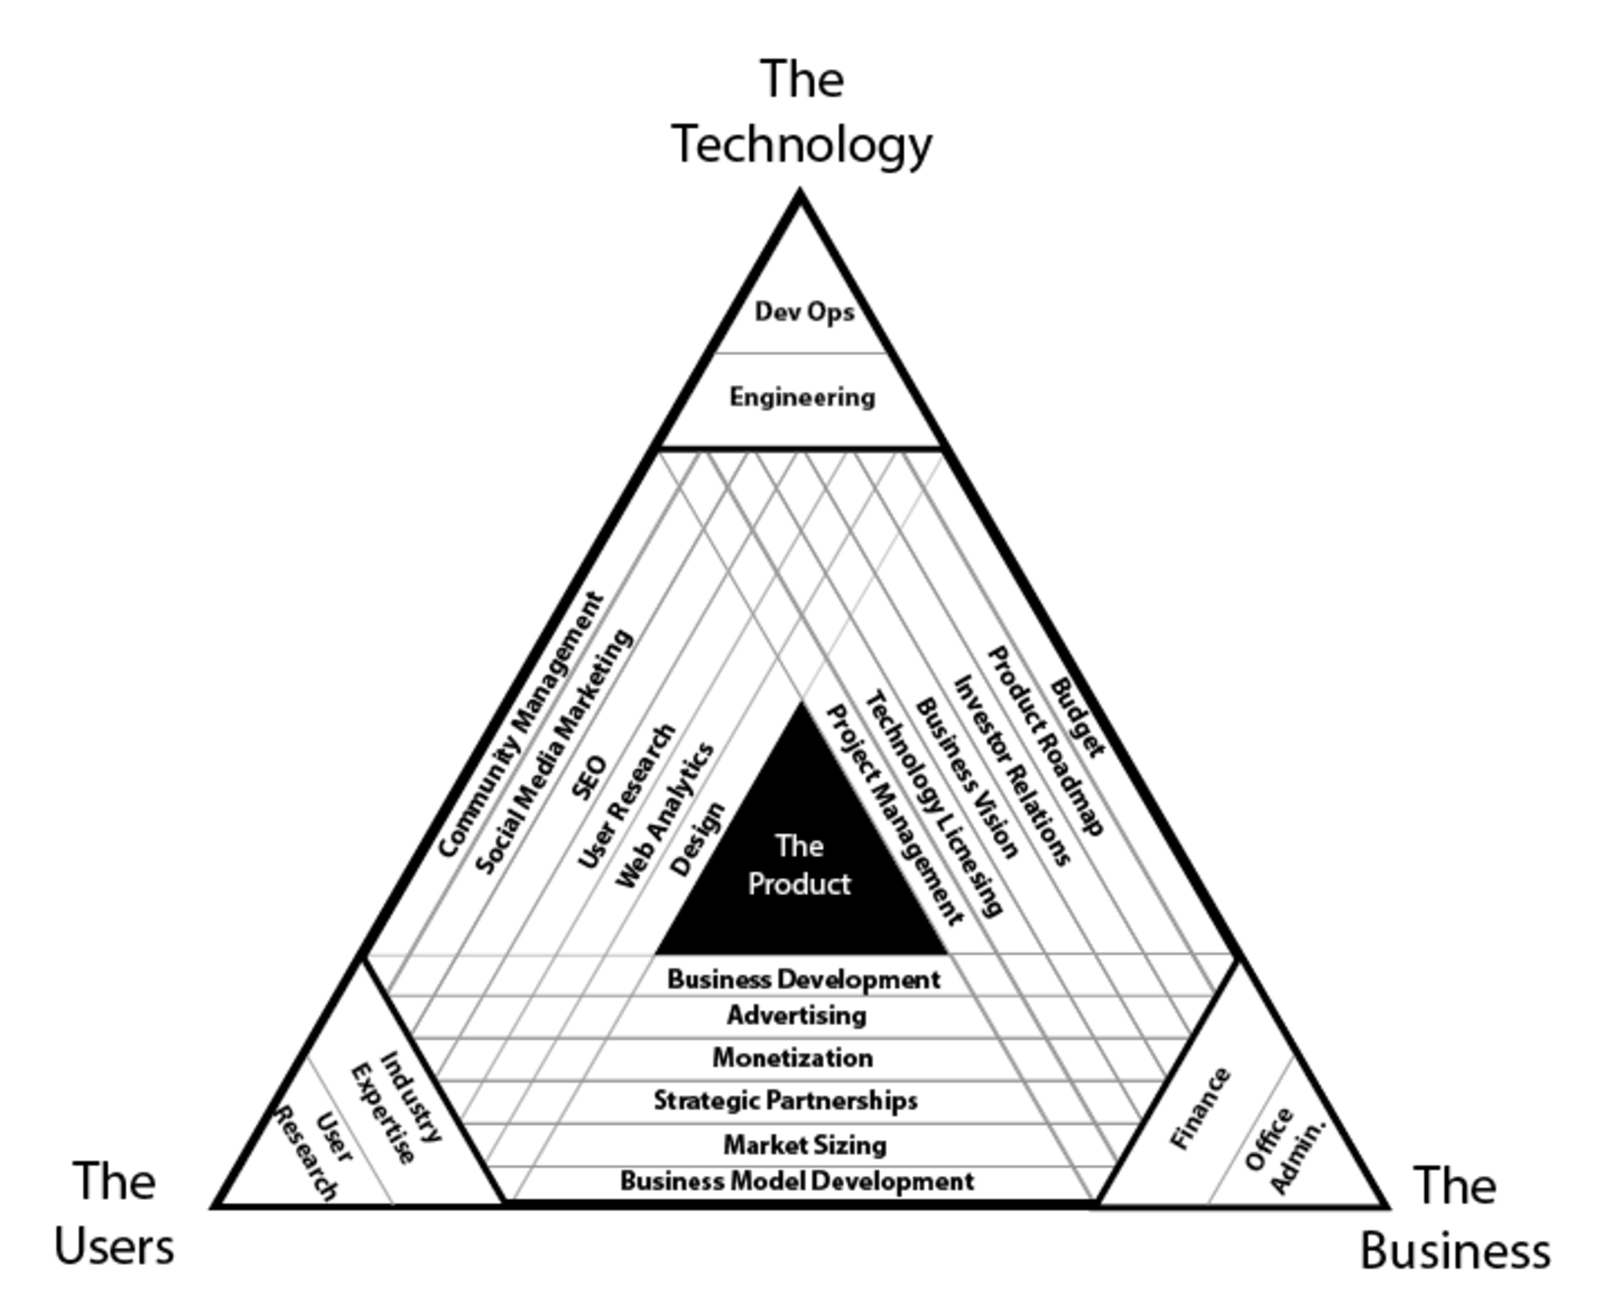 diagram of the roles in a technology business that